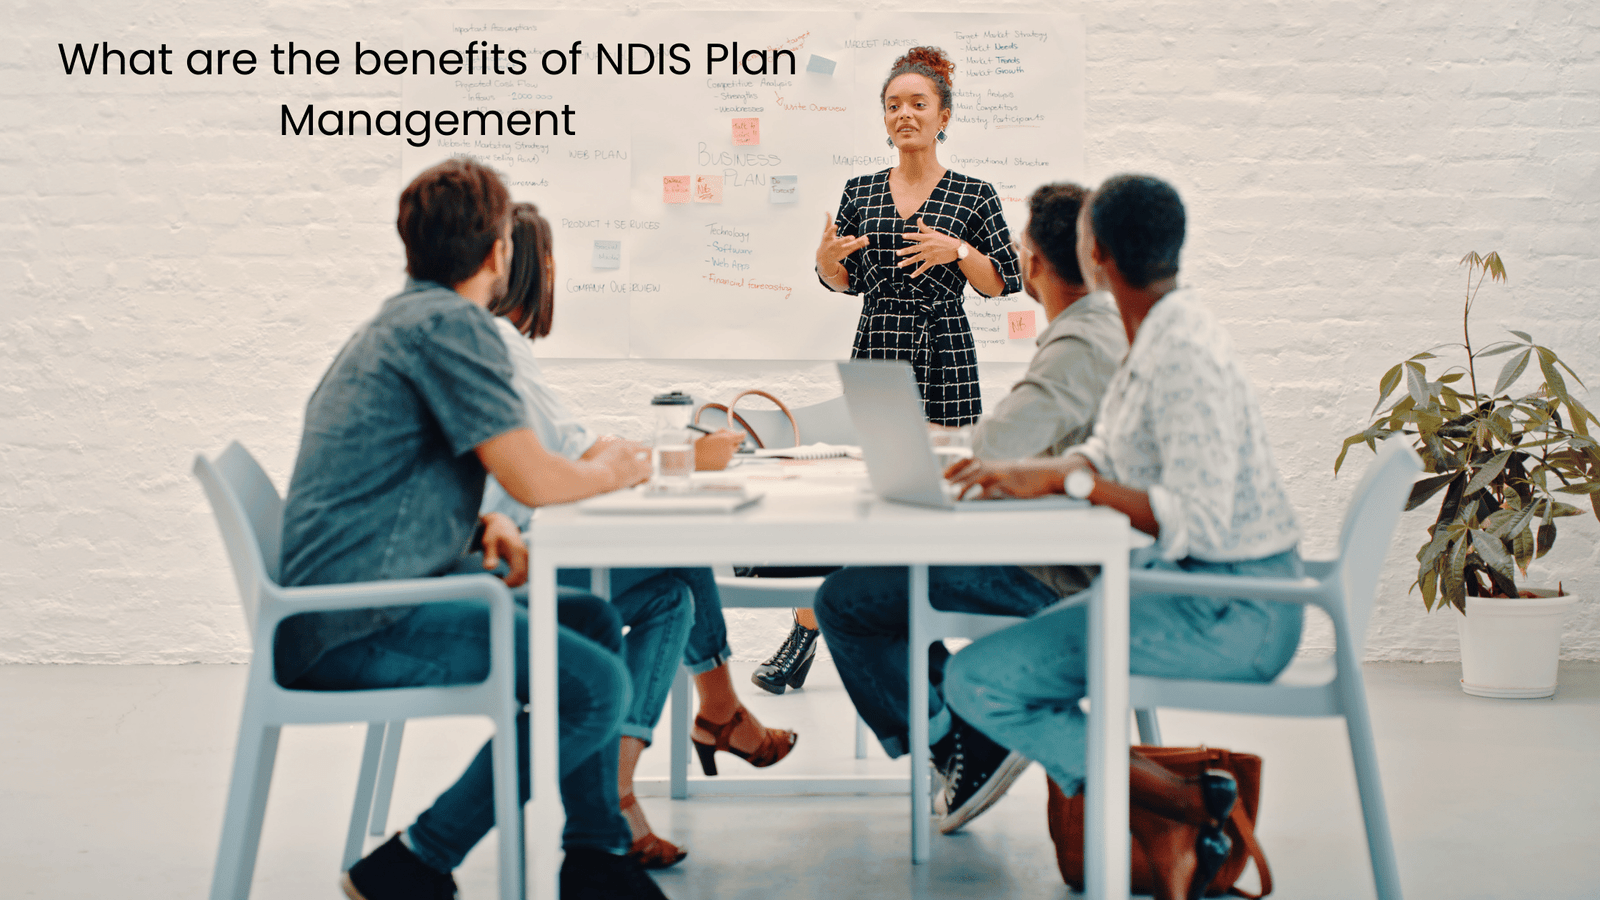 What are the benefits of NDIS Plan Management